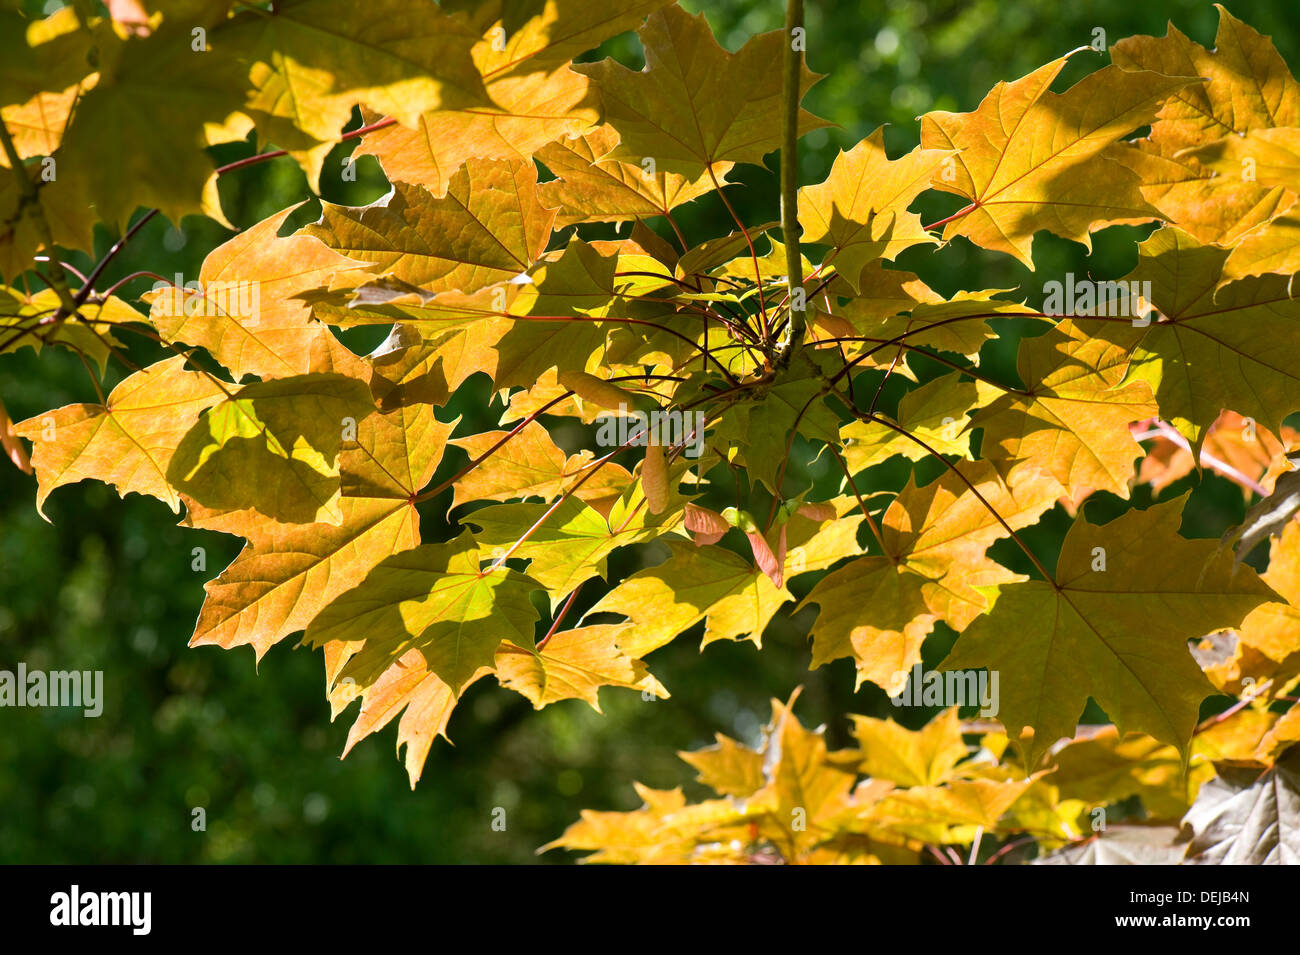 Light shining through the young leaves of an ornamental maple tree, Acer, with a pale red tinge Stock Photo